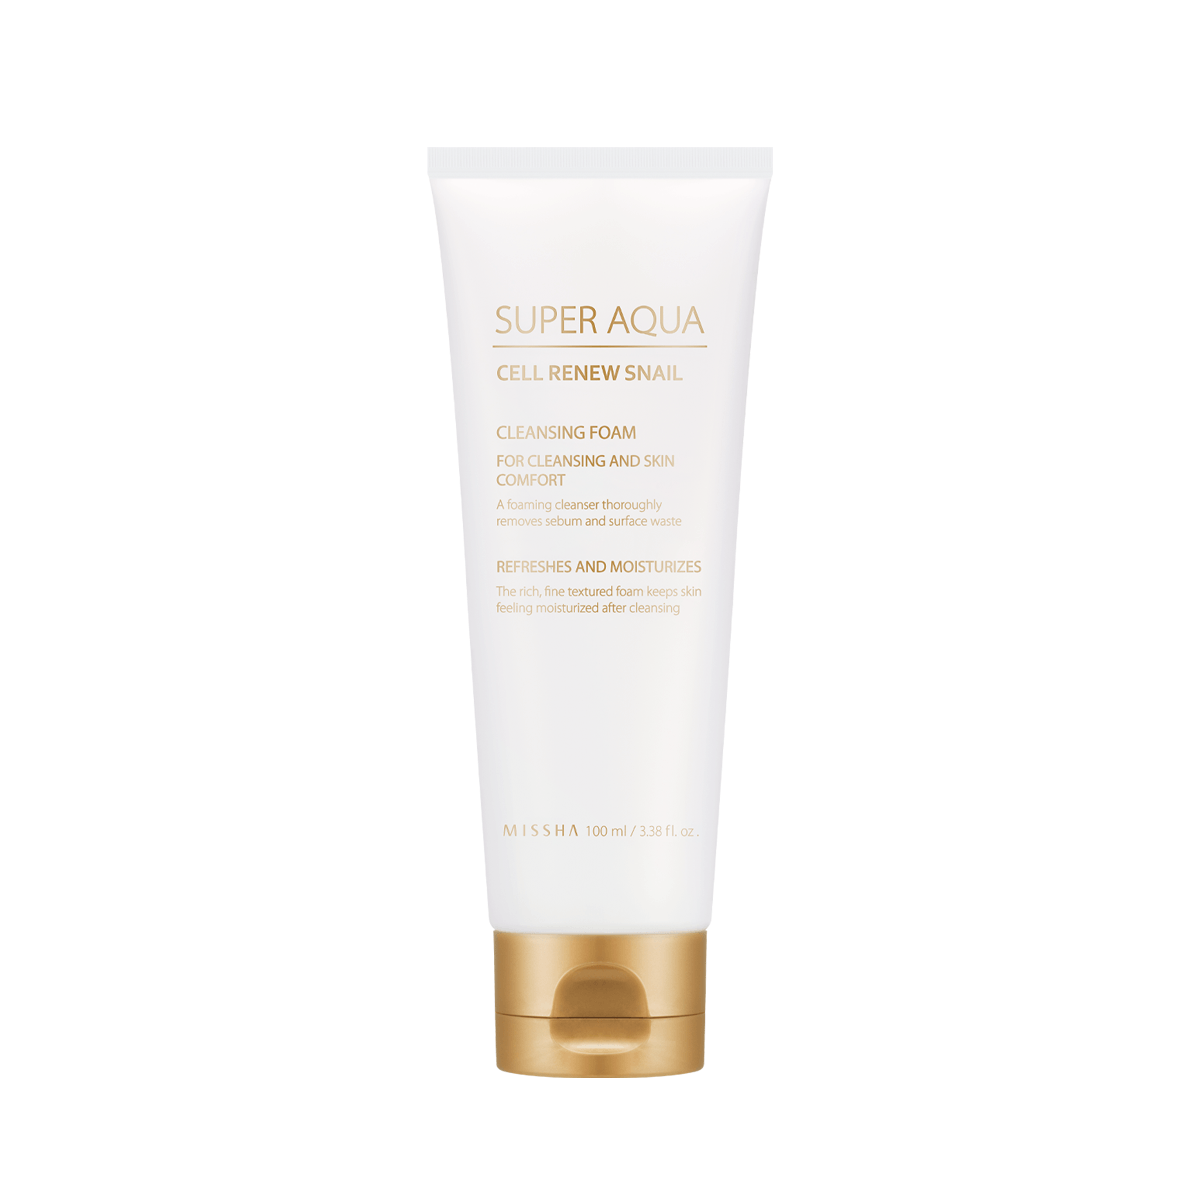 MISSHA Super Aqua Snail Cream, Korean cleansing foam that recovers and renews skin with snail mucin extract for oily skin